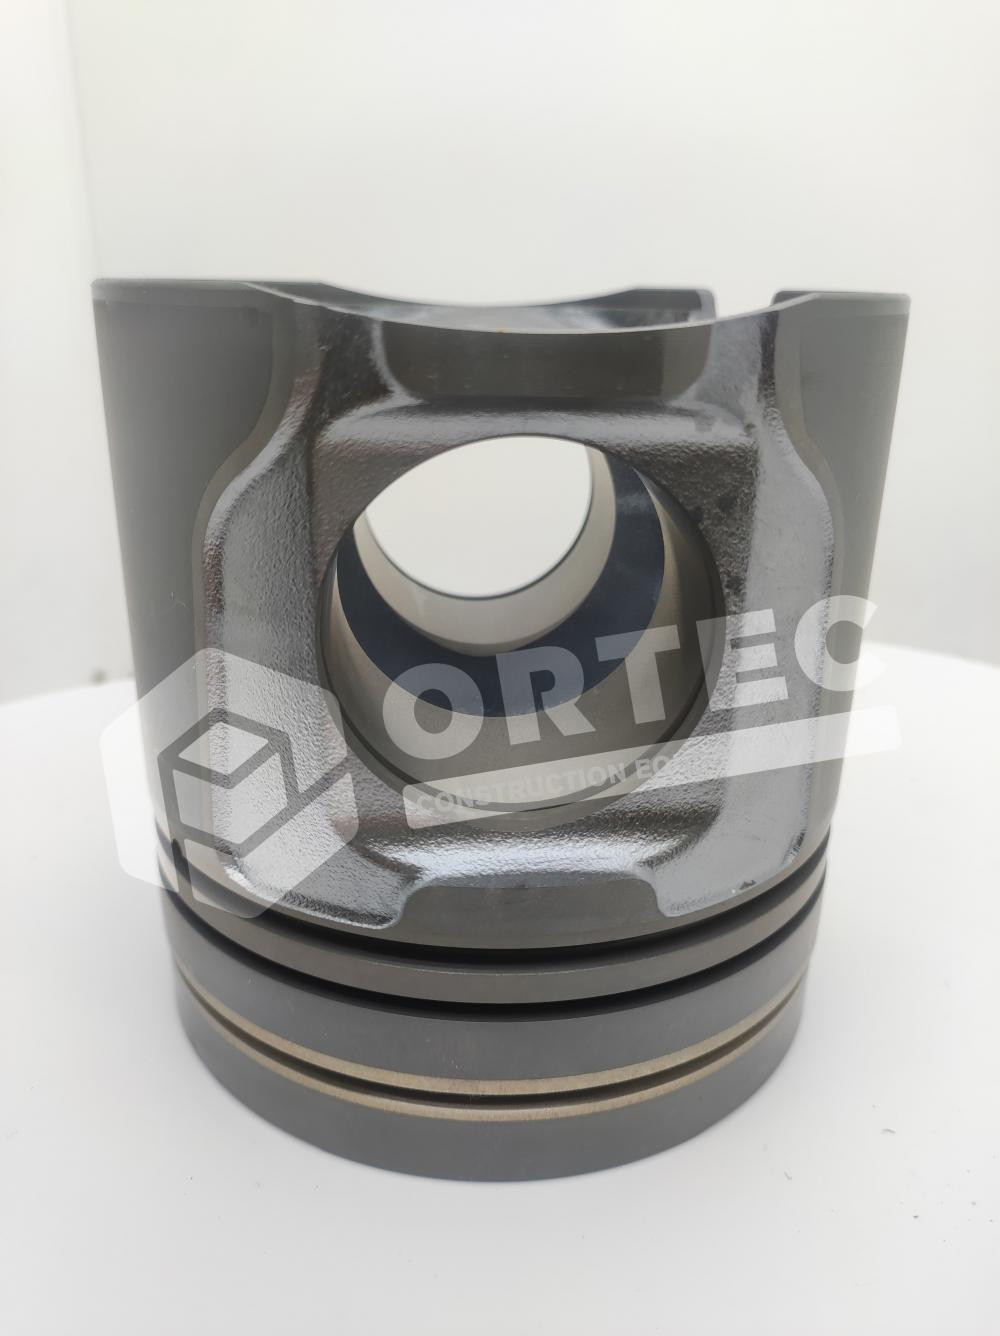 Piston 4110001939048 Suitable for LGMG MT95